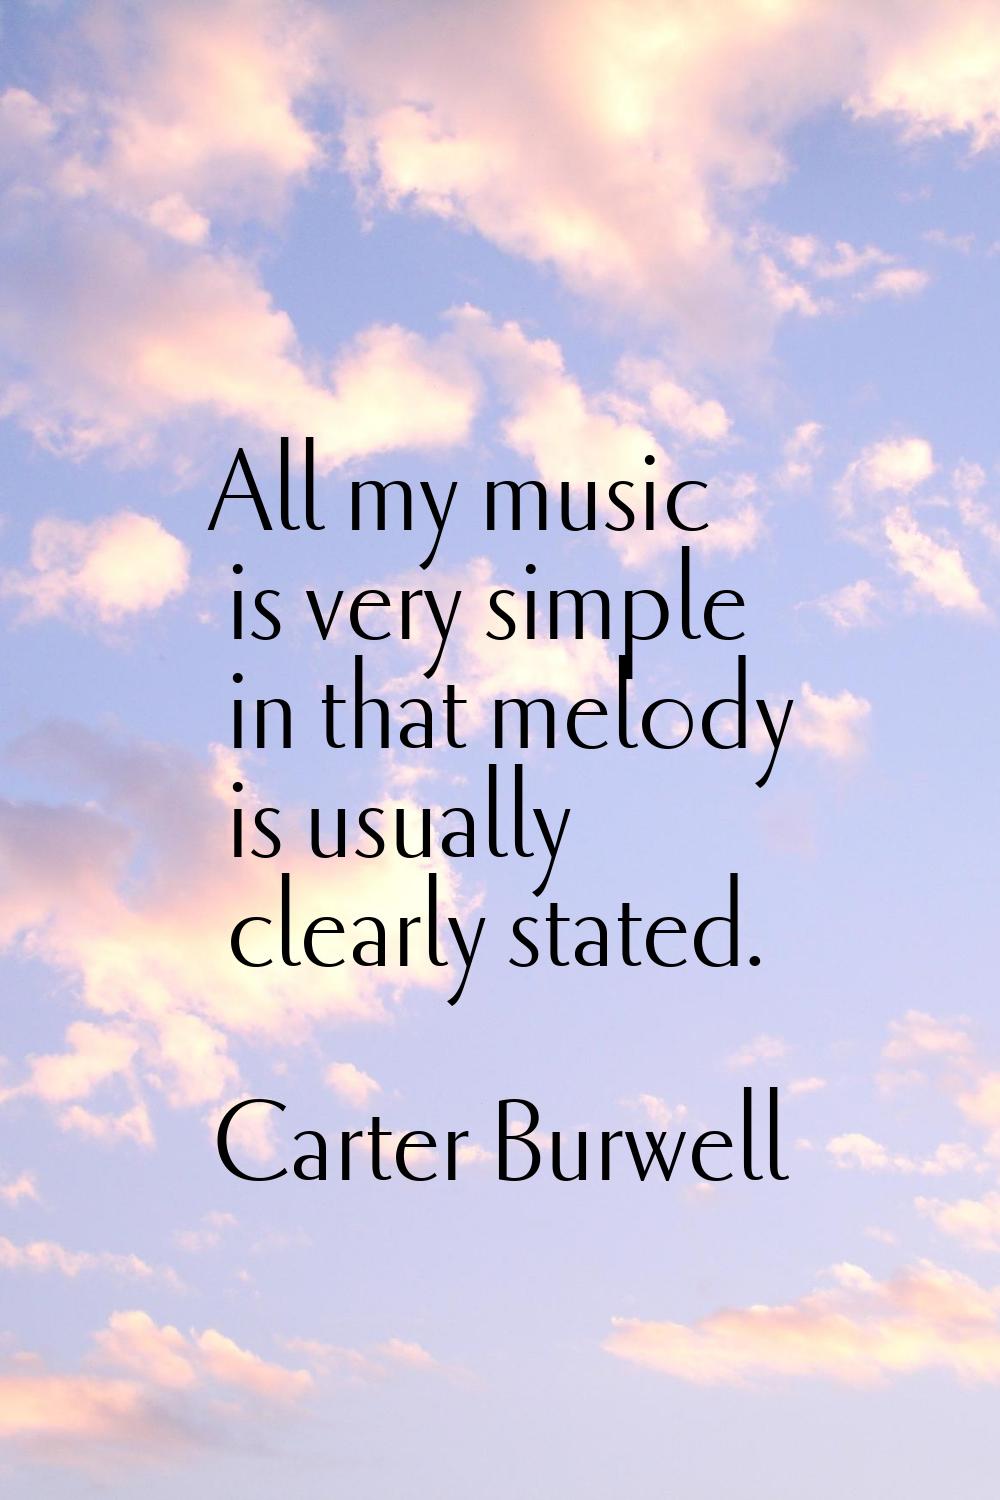 All my music is very simple in that melody is usually clearly stated.